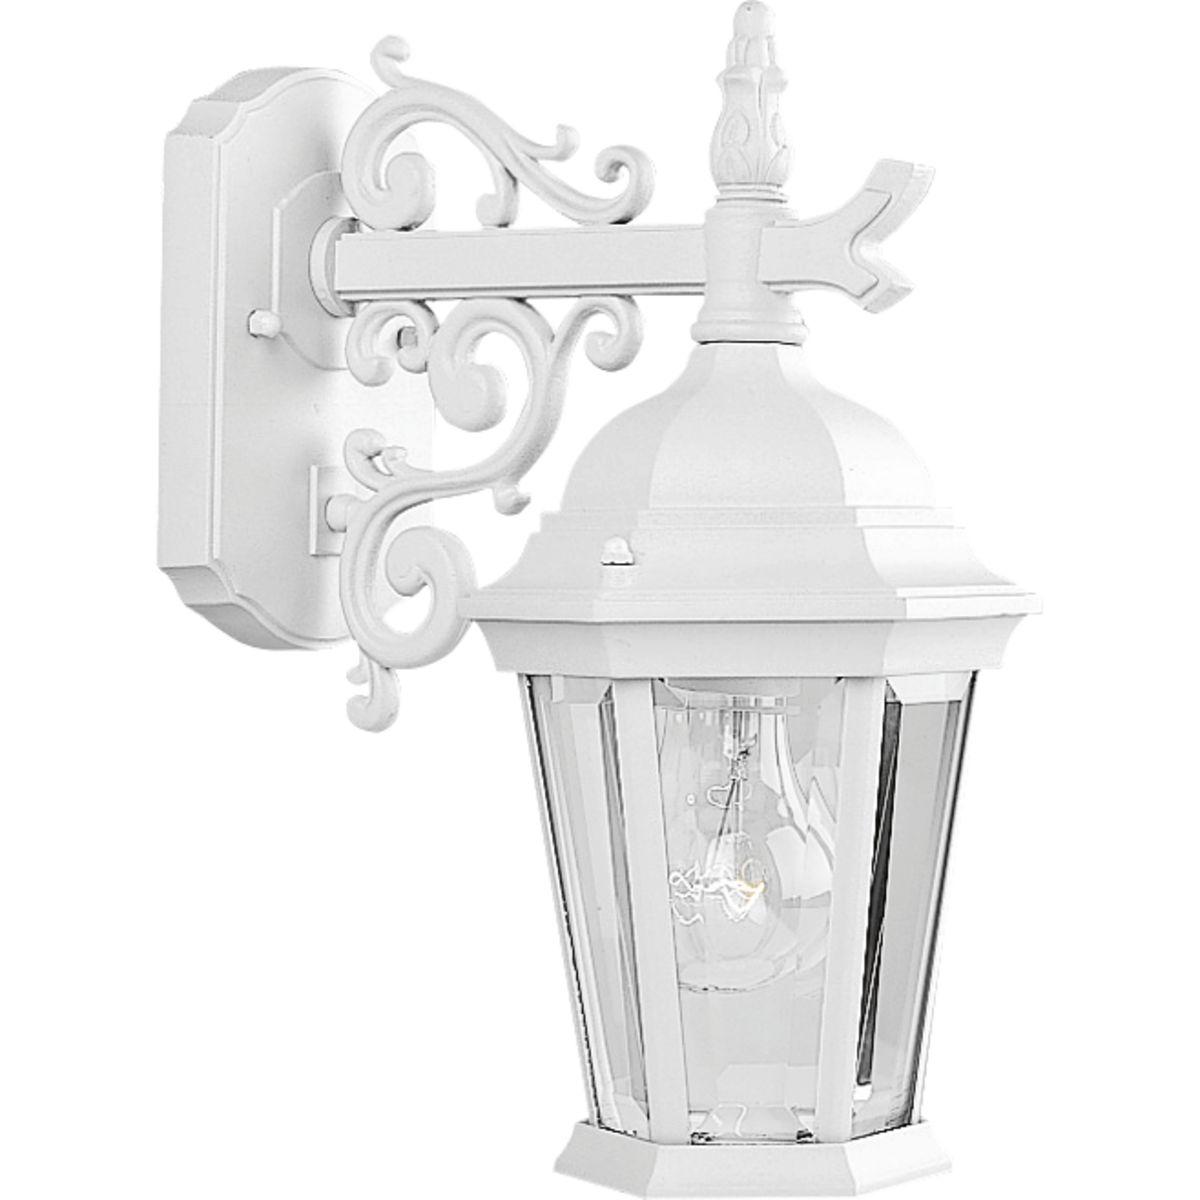 Hubbell P5682-30 The Welbourne collection features hexagonal framework with vine inspired scrolls and clear beveled glass panels. Cast aluminum construction with durable powder coat finish. One-light 6-1/2" top mount outdoor wall lantern.  ; Hexagonal framework. ; Vine in